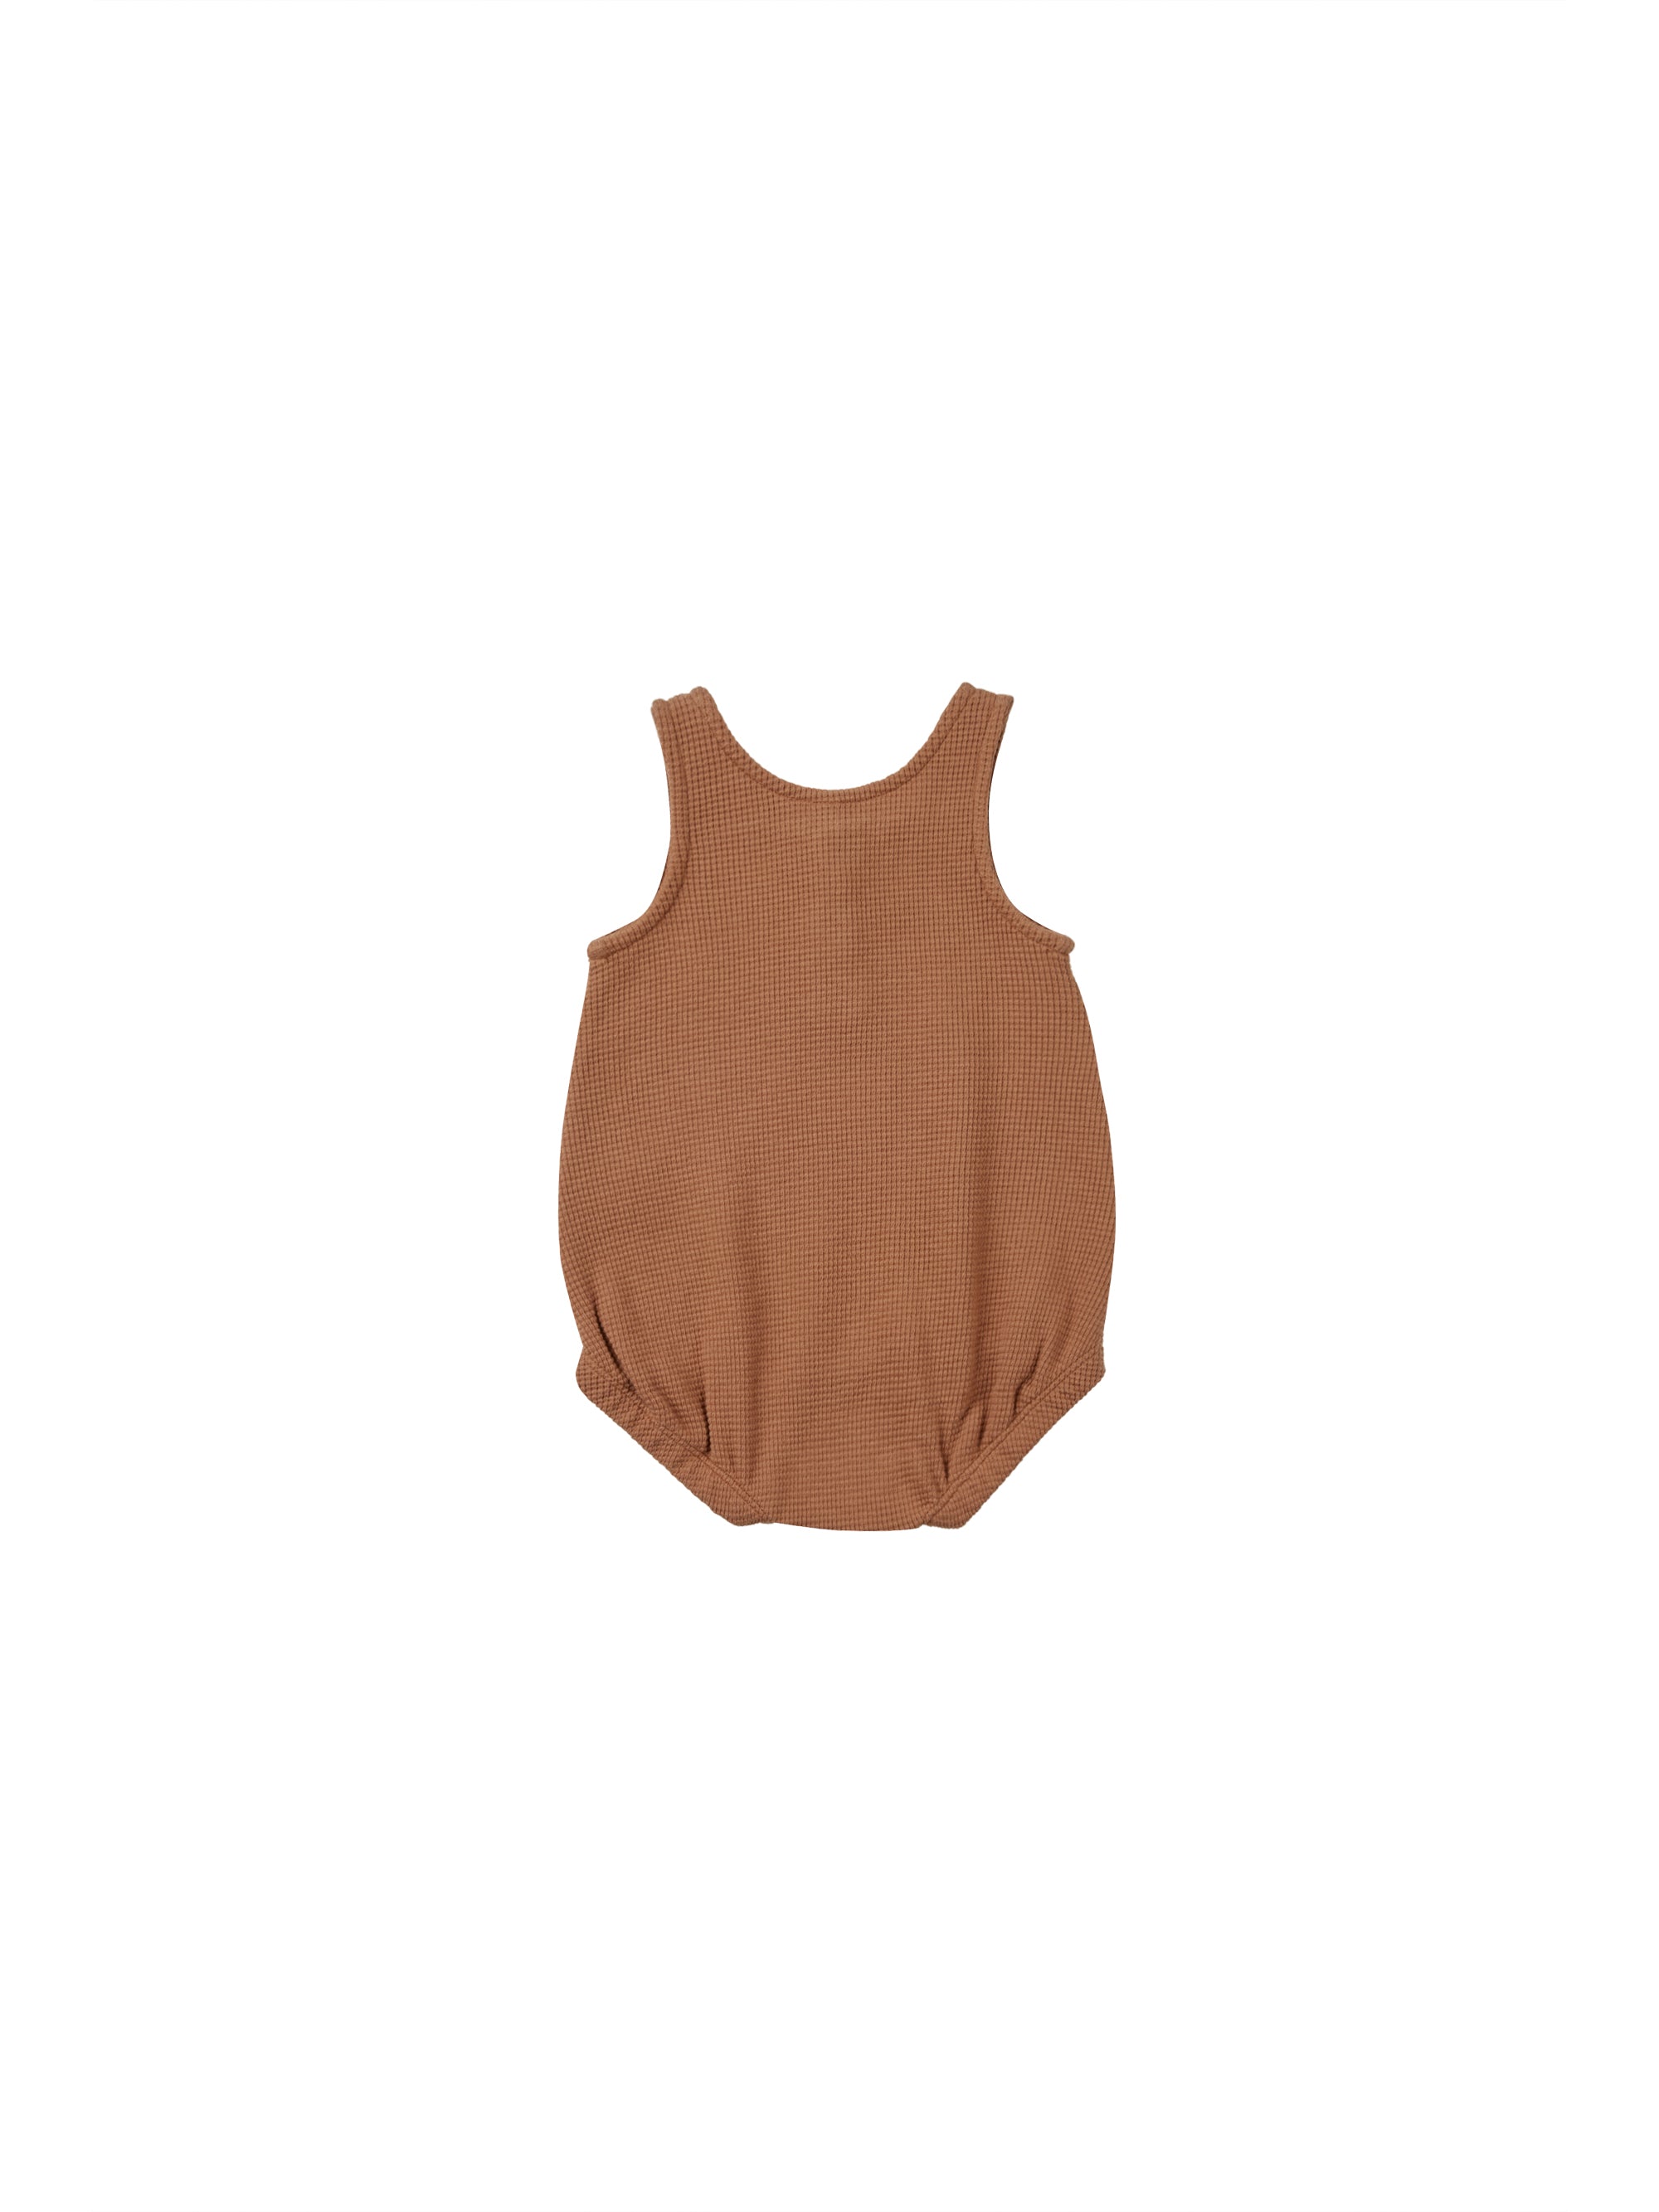 Quincy Mae sleeveless bubble romper || clay